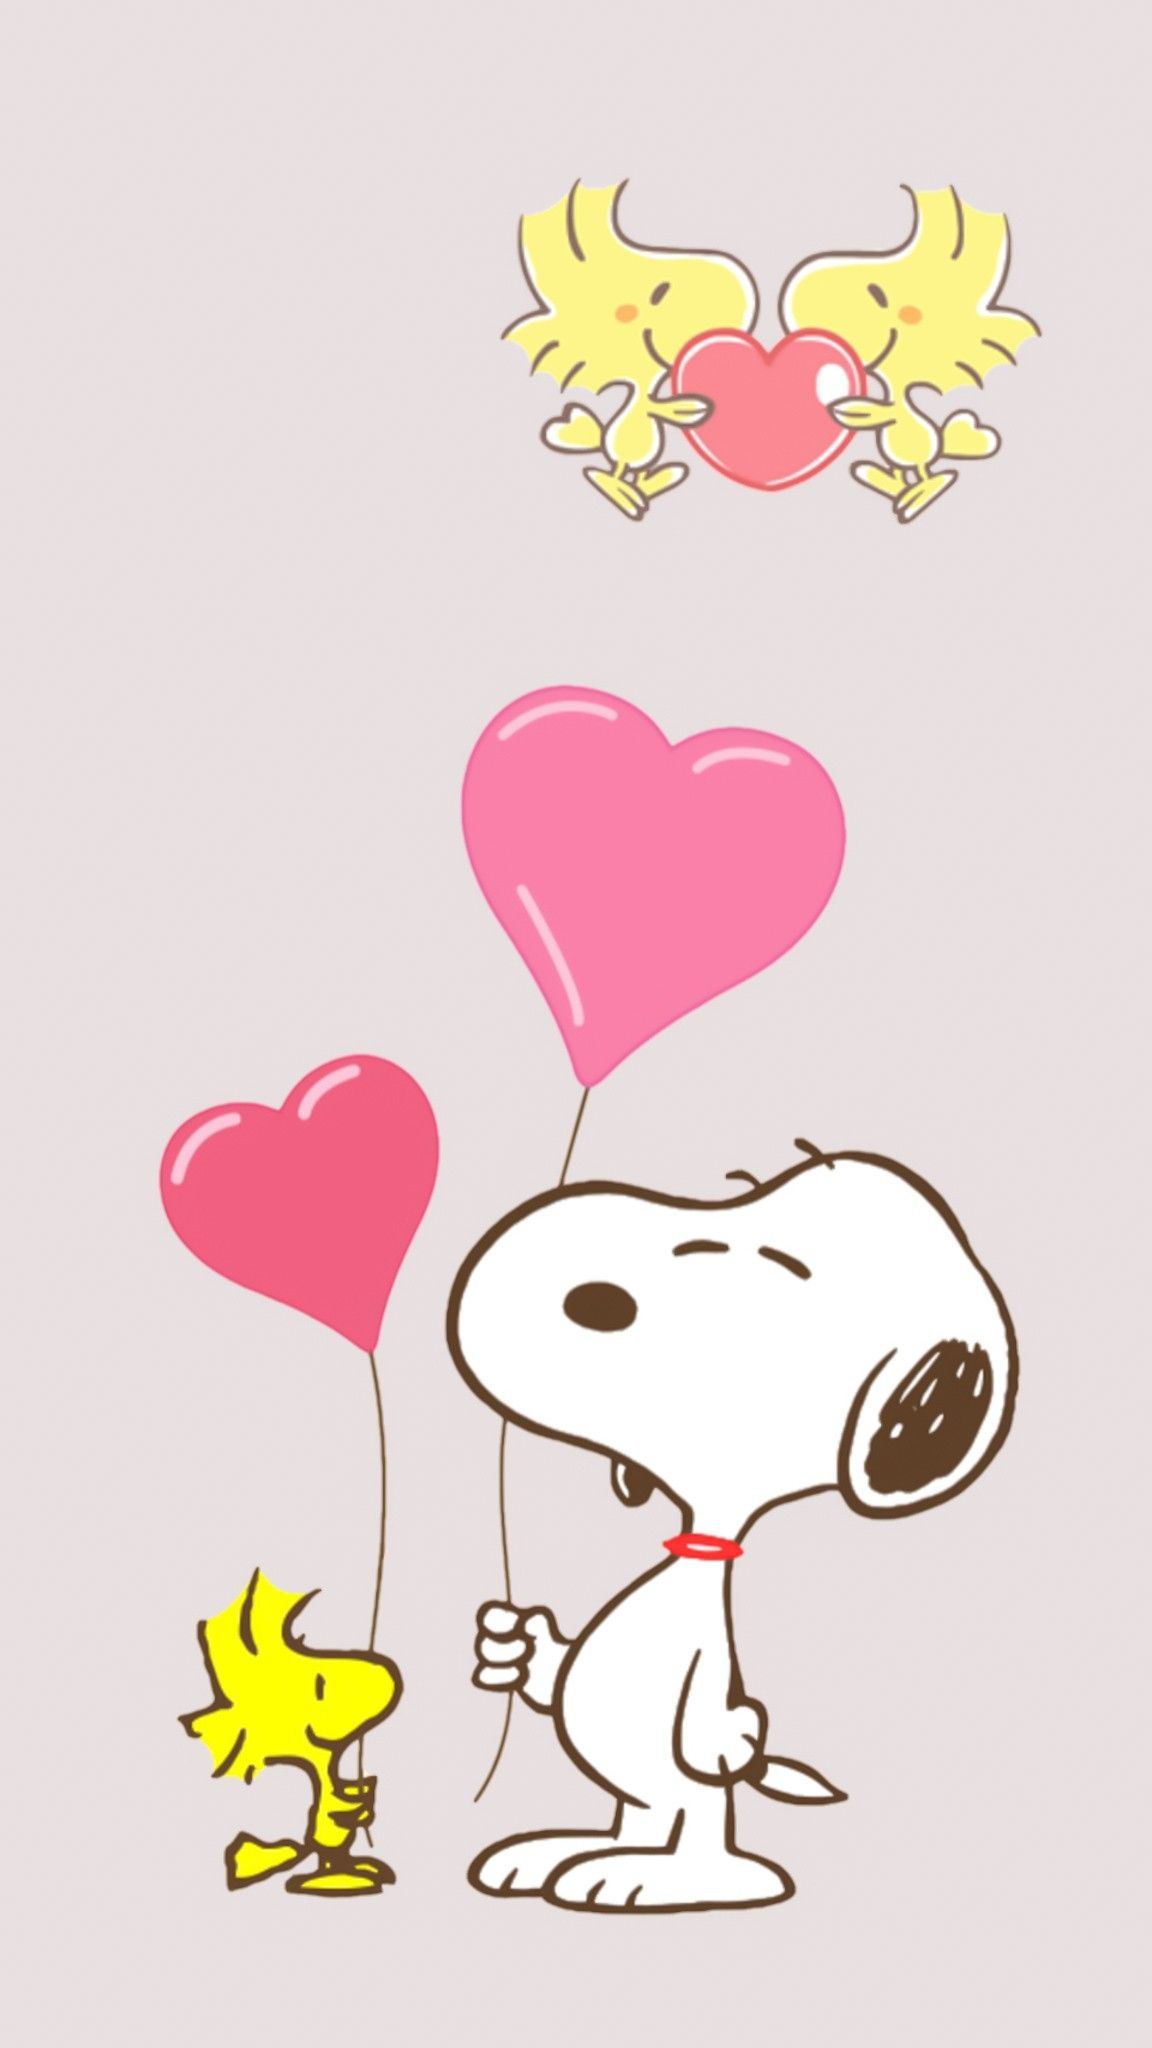 1152x2048 Pin by Aekkalisa on Snoopy | Snoopy wallpaper, Snoopy valentine, Snoopy valentine's day